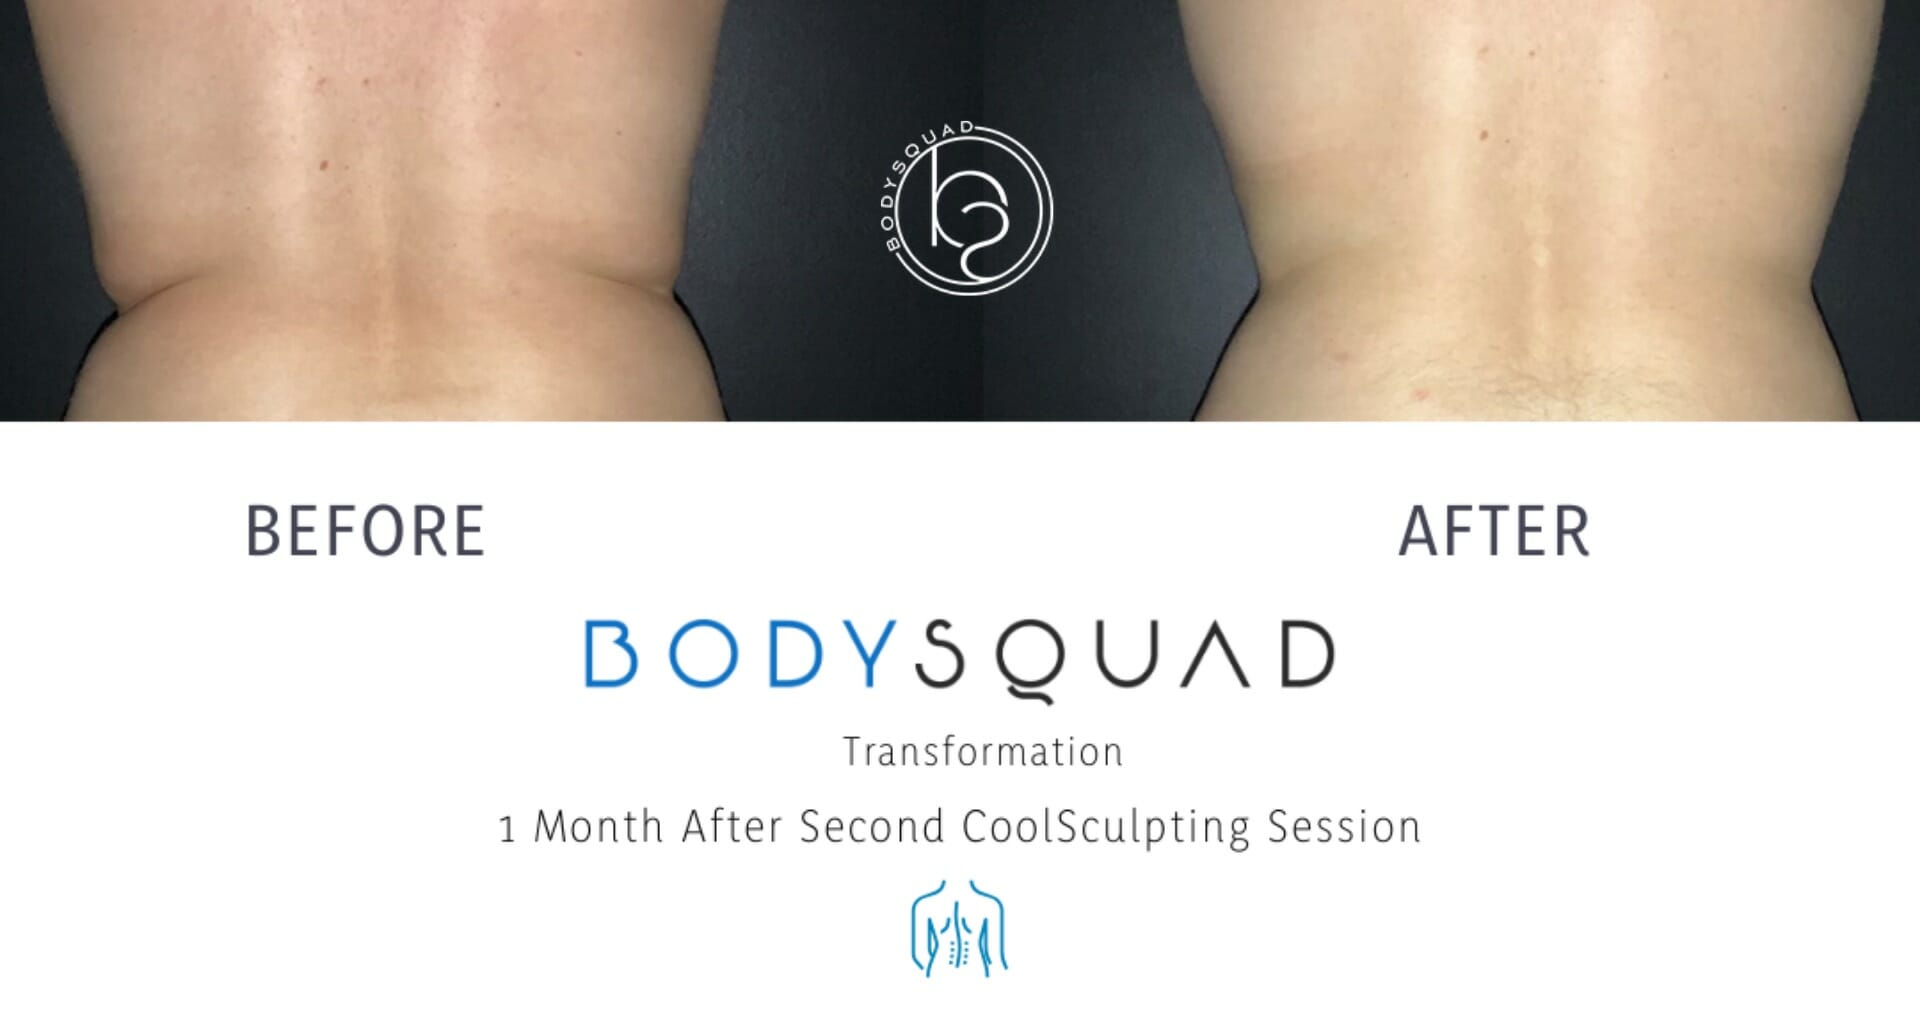 CoolSculpting back treatment before and after at the BodySquad Boca Raton